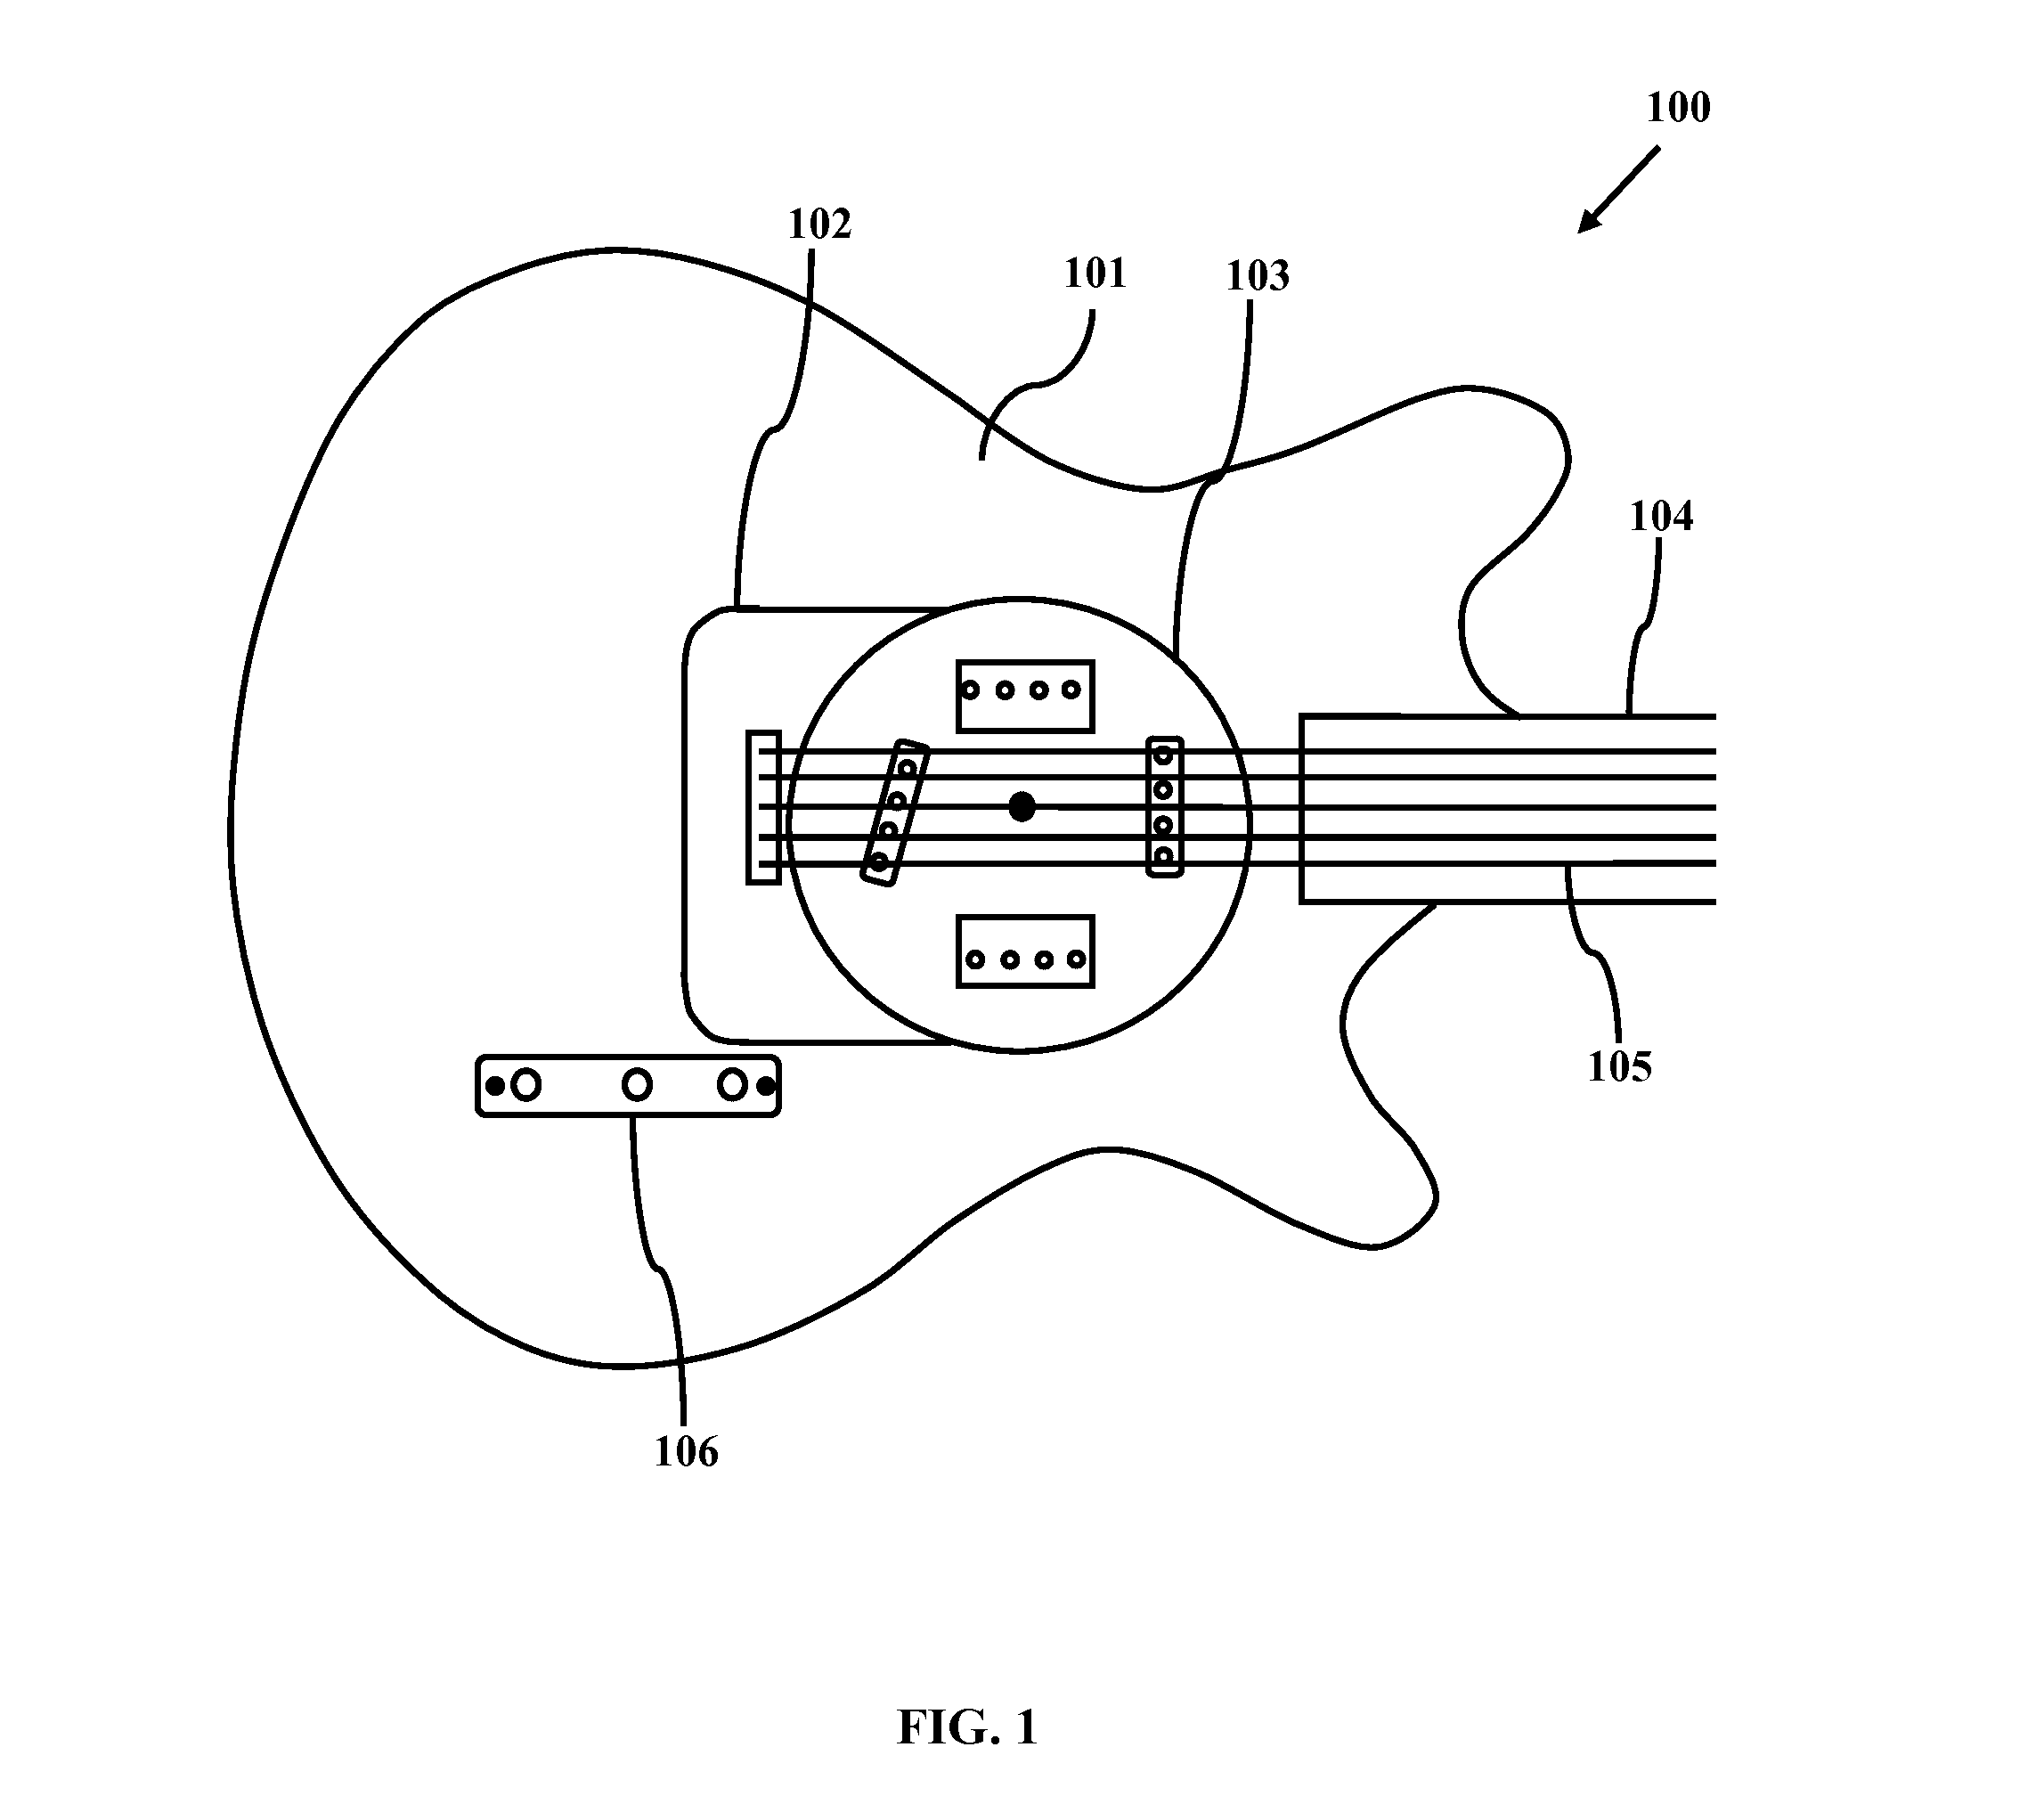 System and method for switching sound pickups in an electric guitar using a spin wheel arrangement